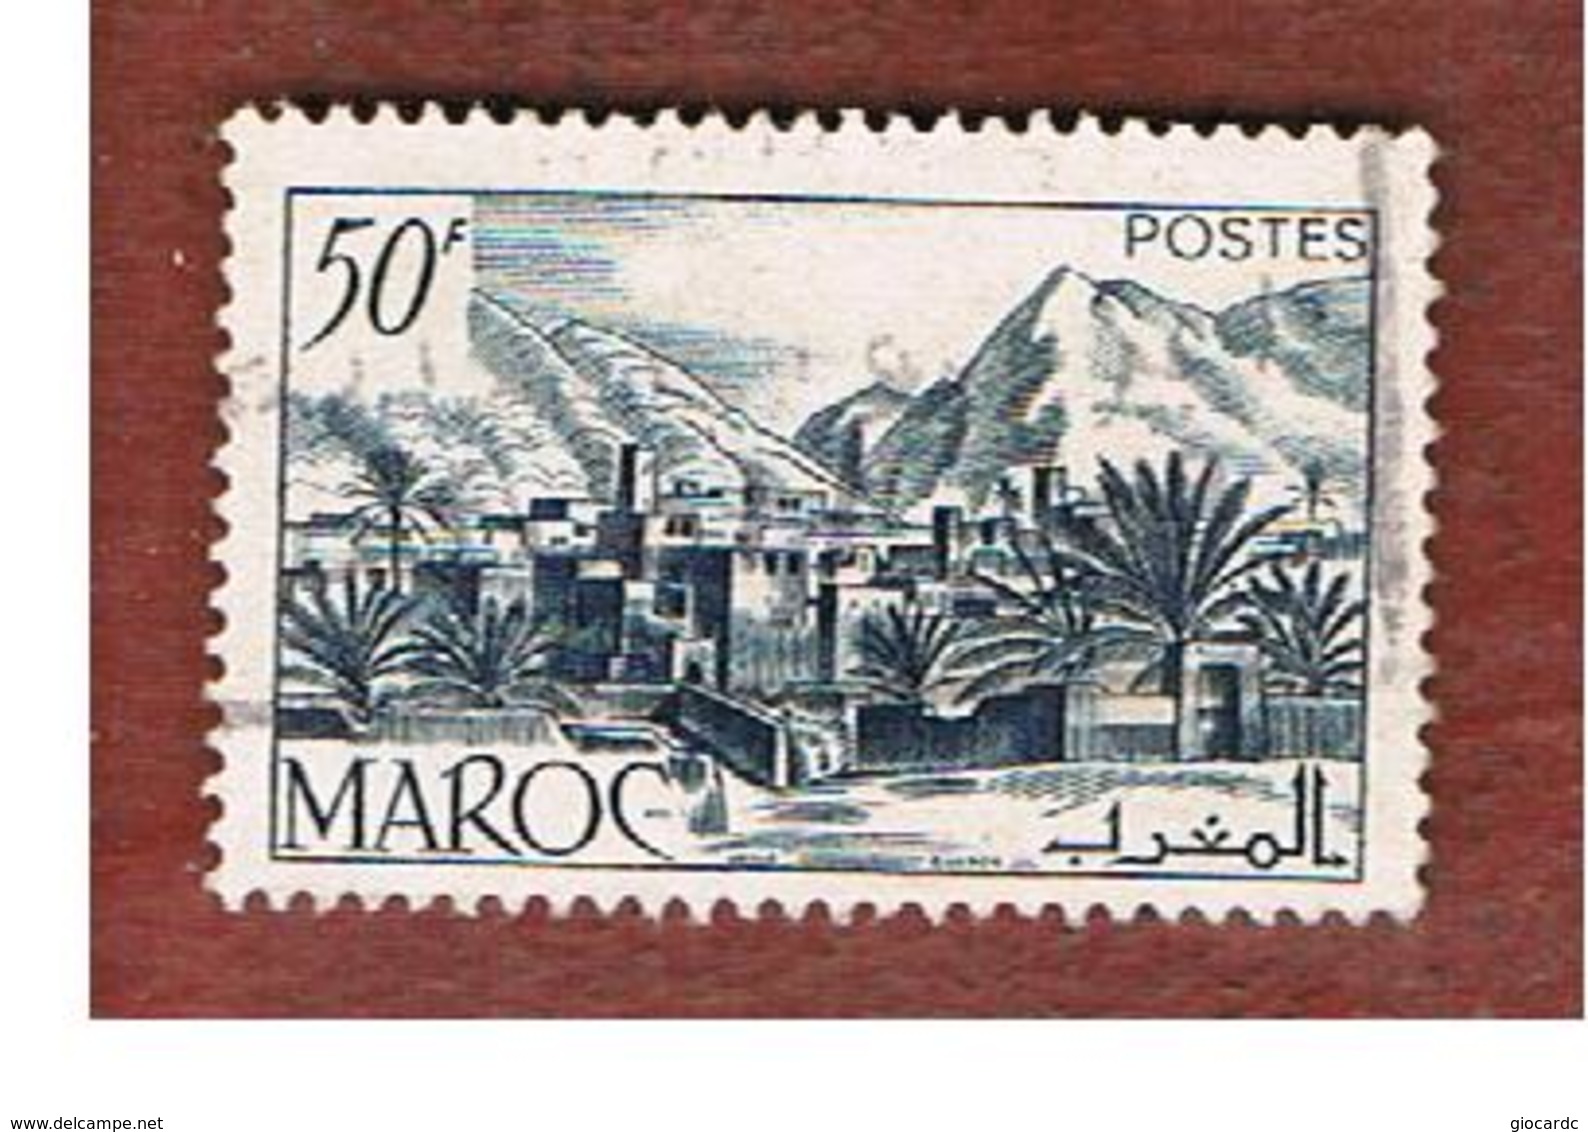 MAROCCO FRANCESE (FRENCH MOROCCO)  - SG 337e  -  1950  TODRA VALLEY  50  - USED ° - Gebruikt